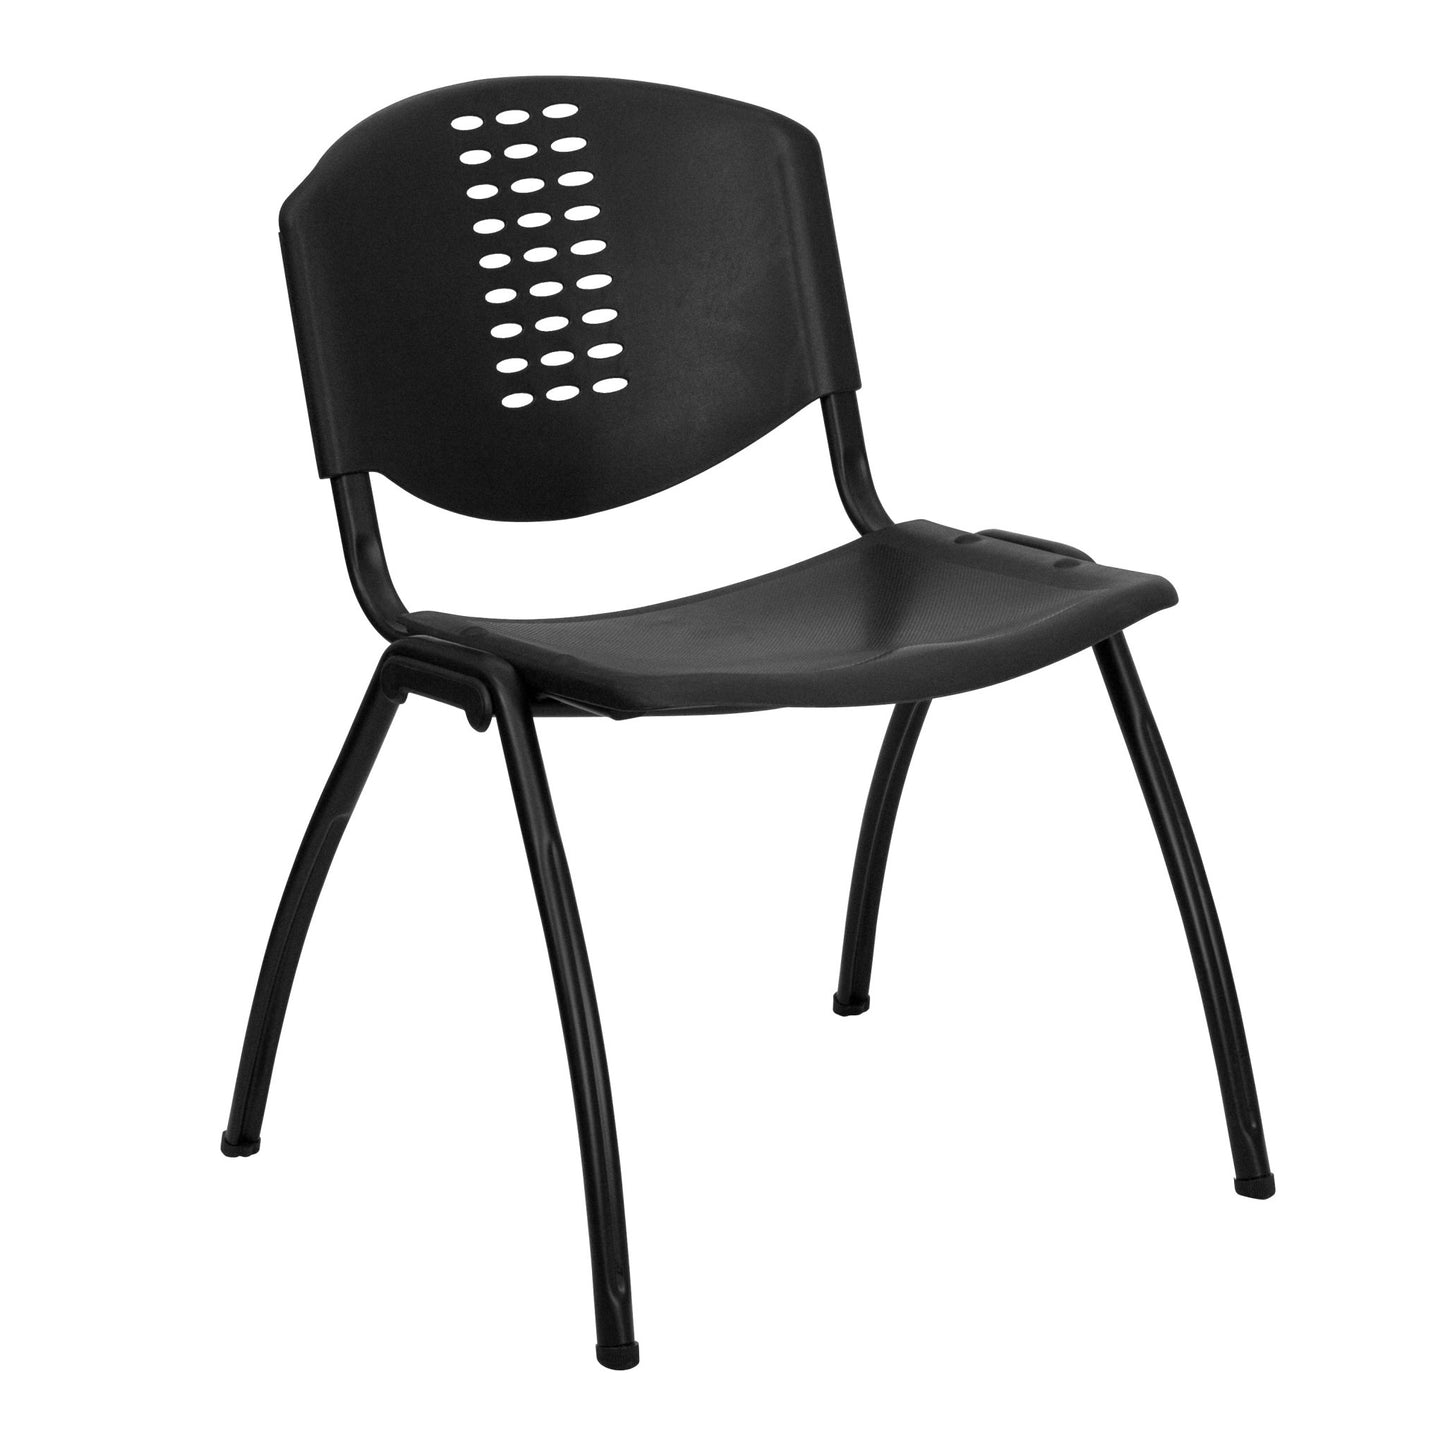 HERCULES Series 880 lb. Capacity Black Plastic Stack Chair with Oval Cutout Back and Black Frame - SchoolOutlet